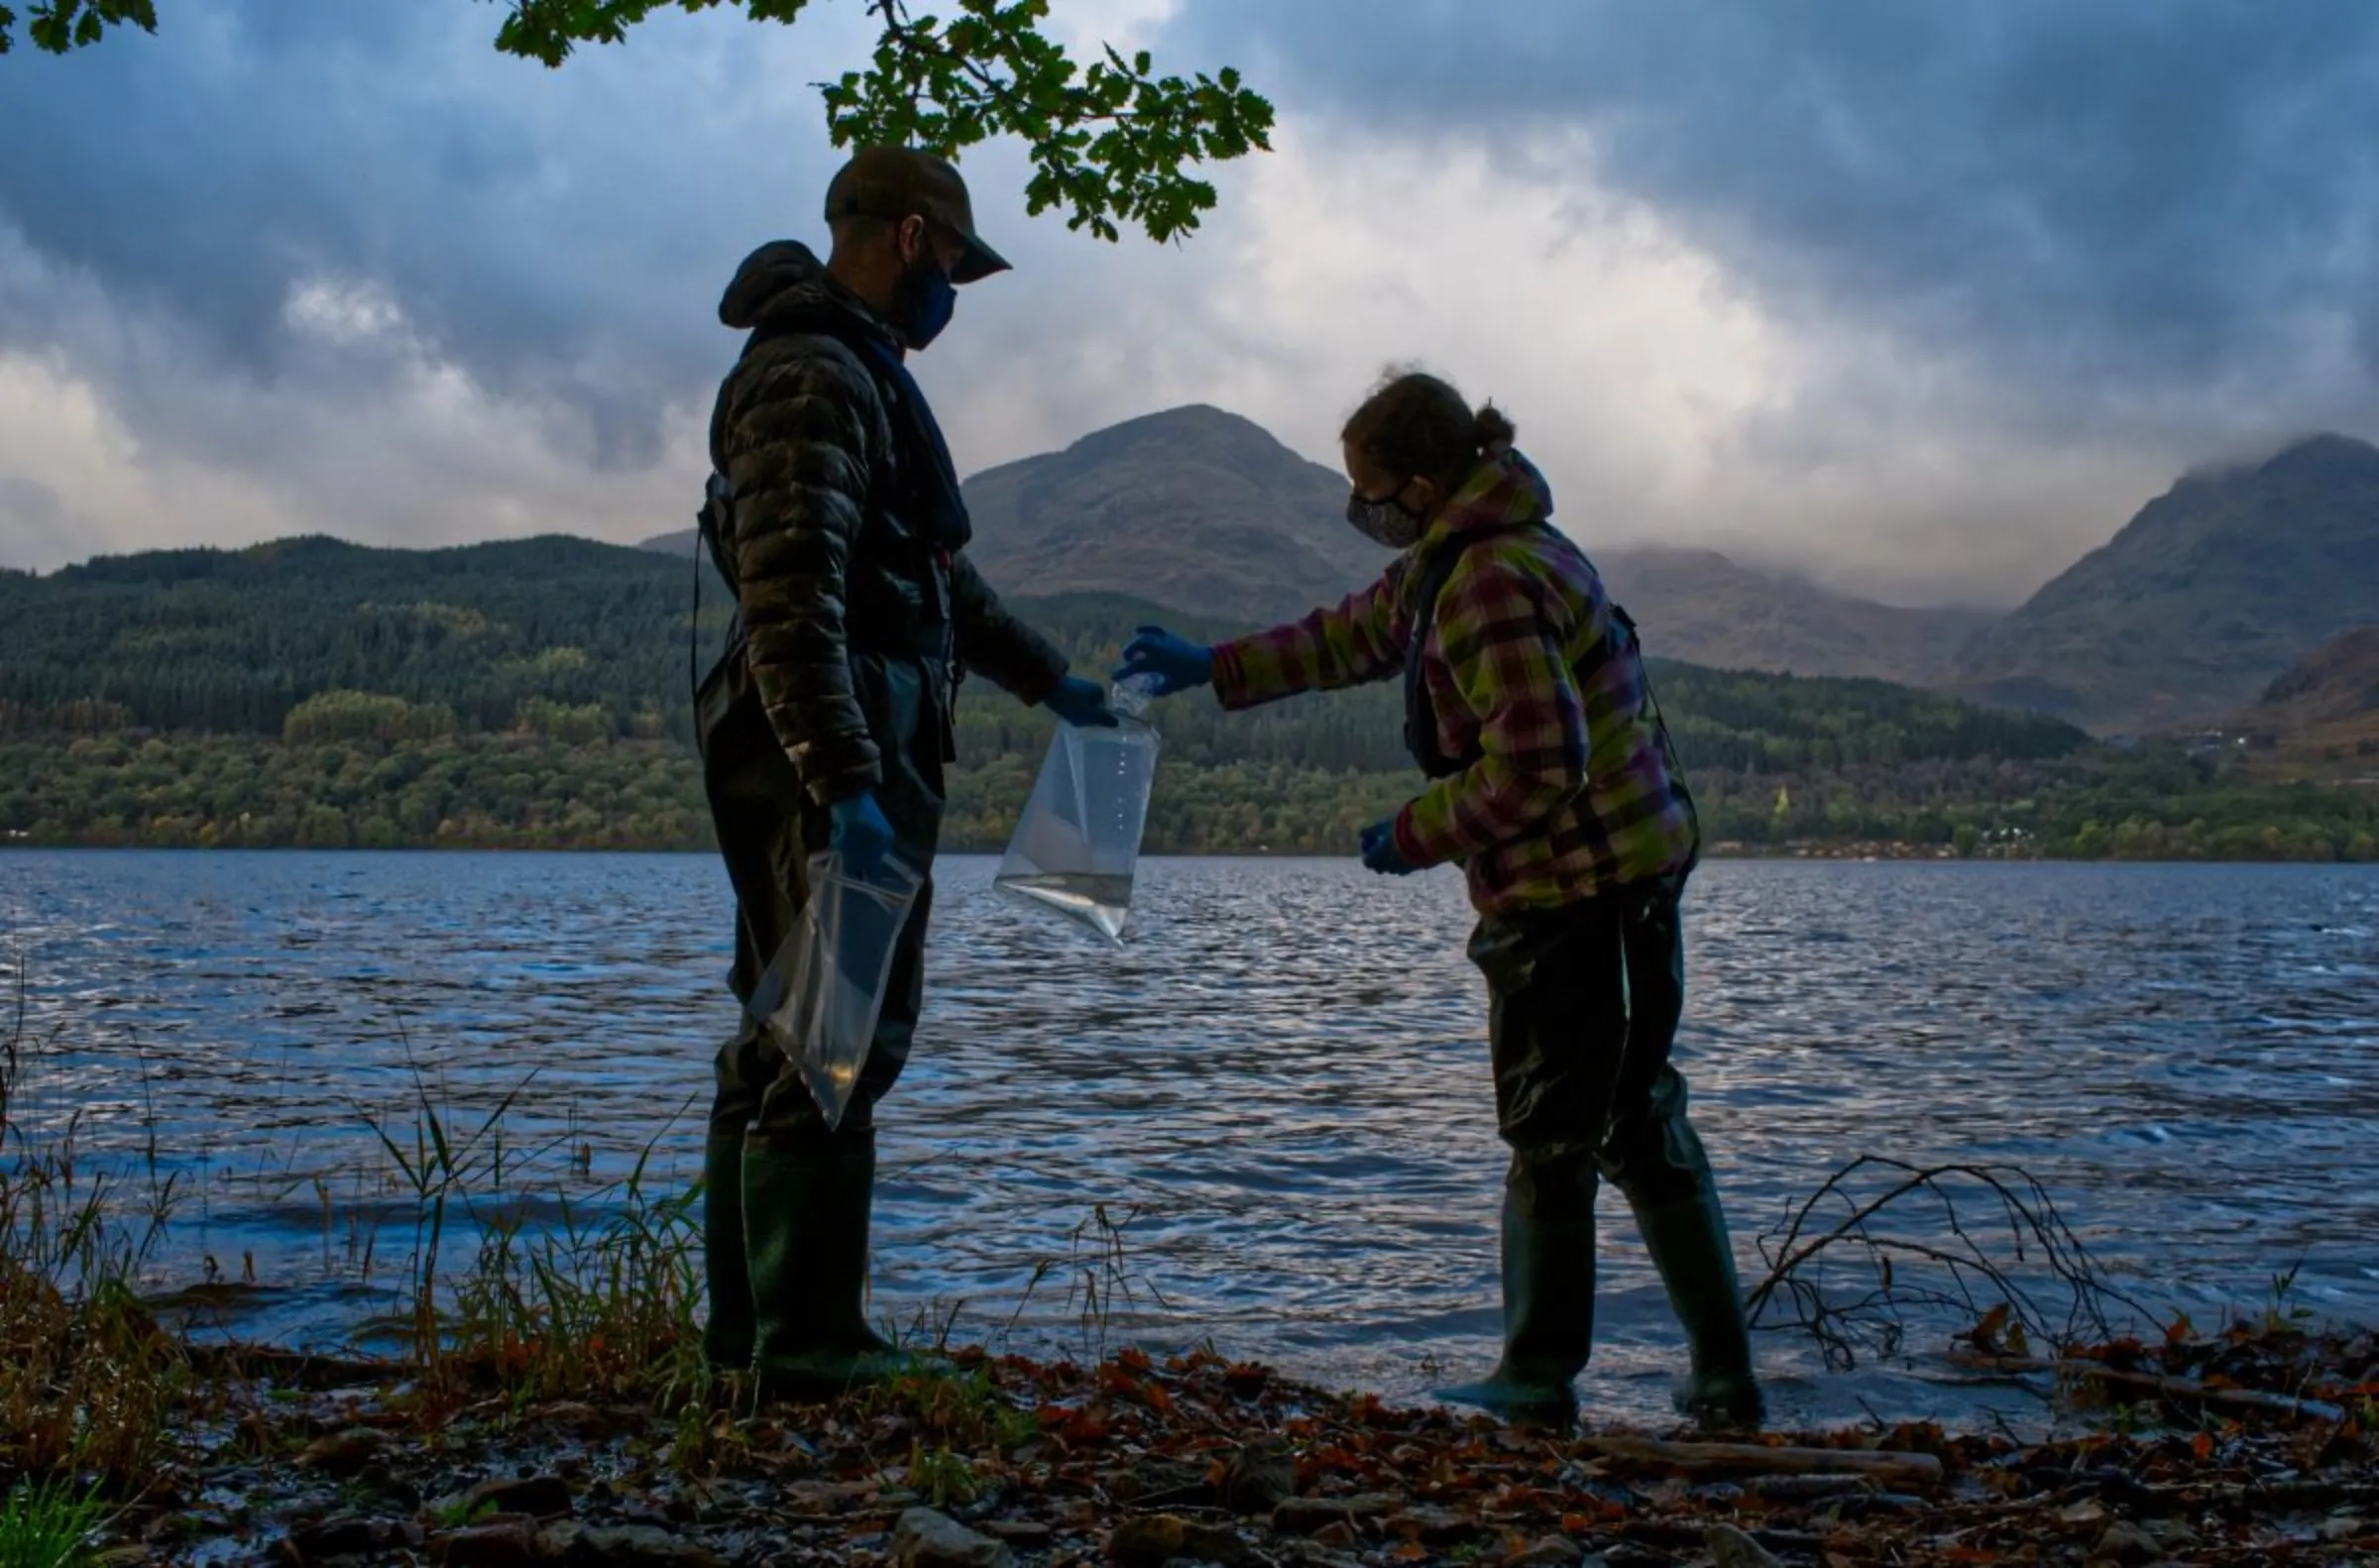 Scientists from monitoring company NatureMetrics collect water to then capture traces of DNA to identify local wildlife species, in The Trossachs National Park, Scotland, October 20, 2021